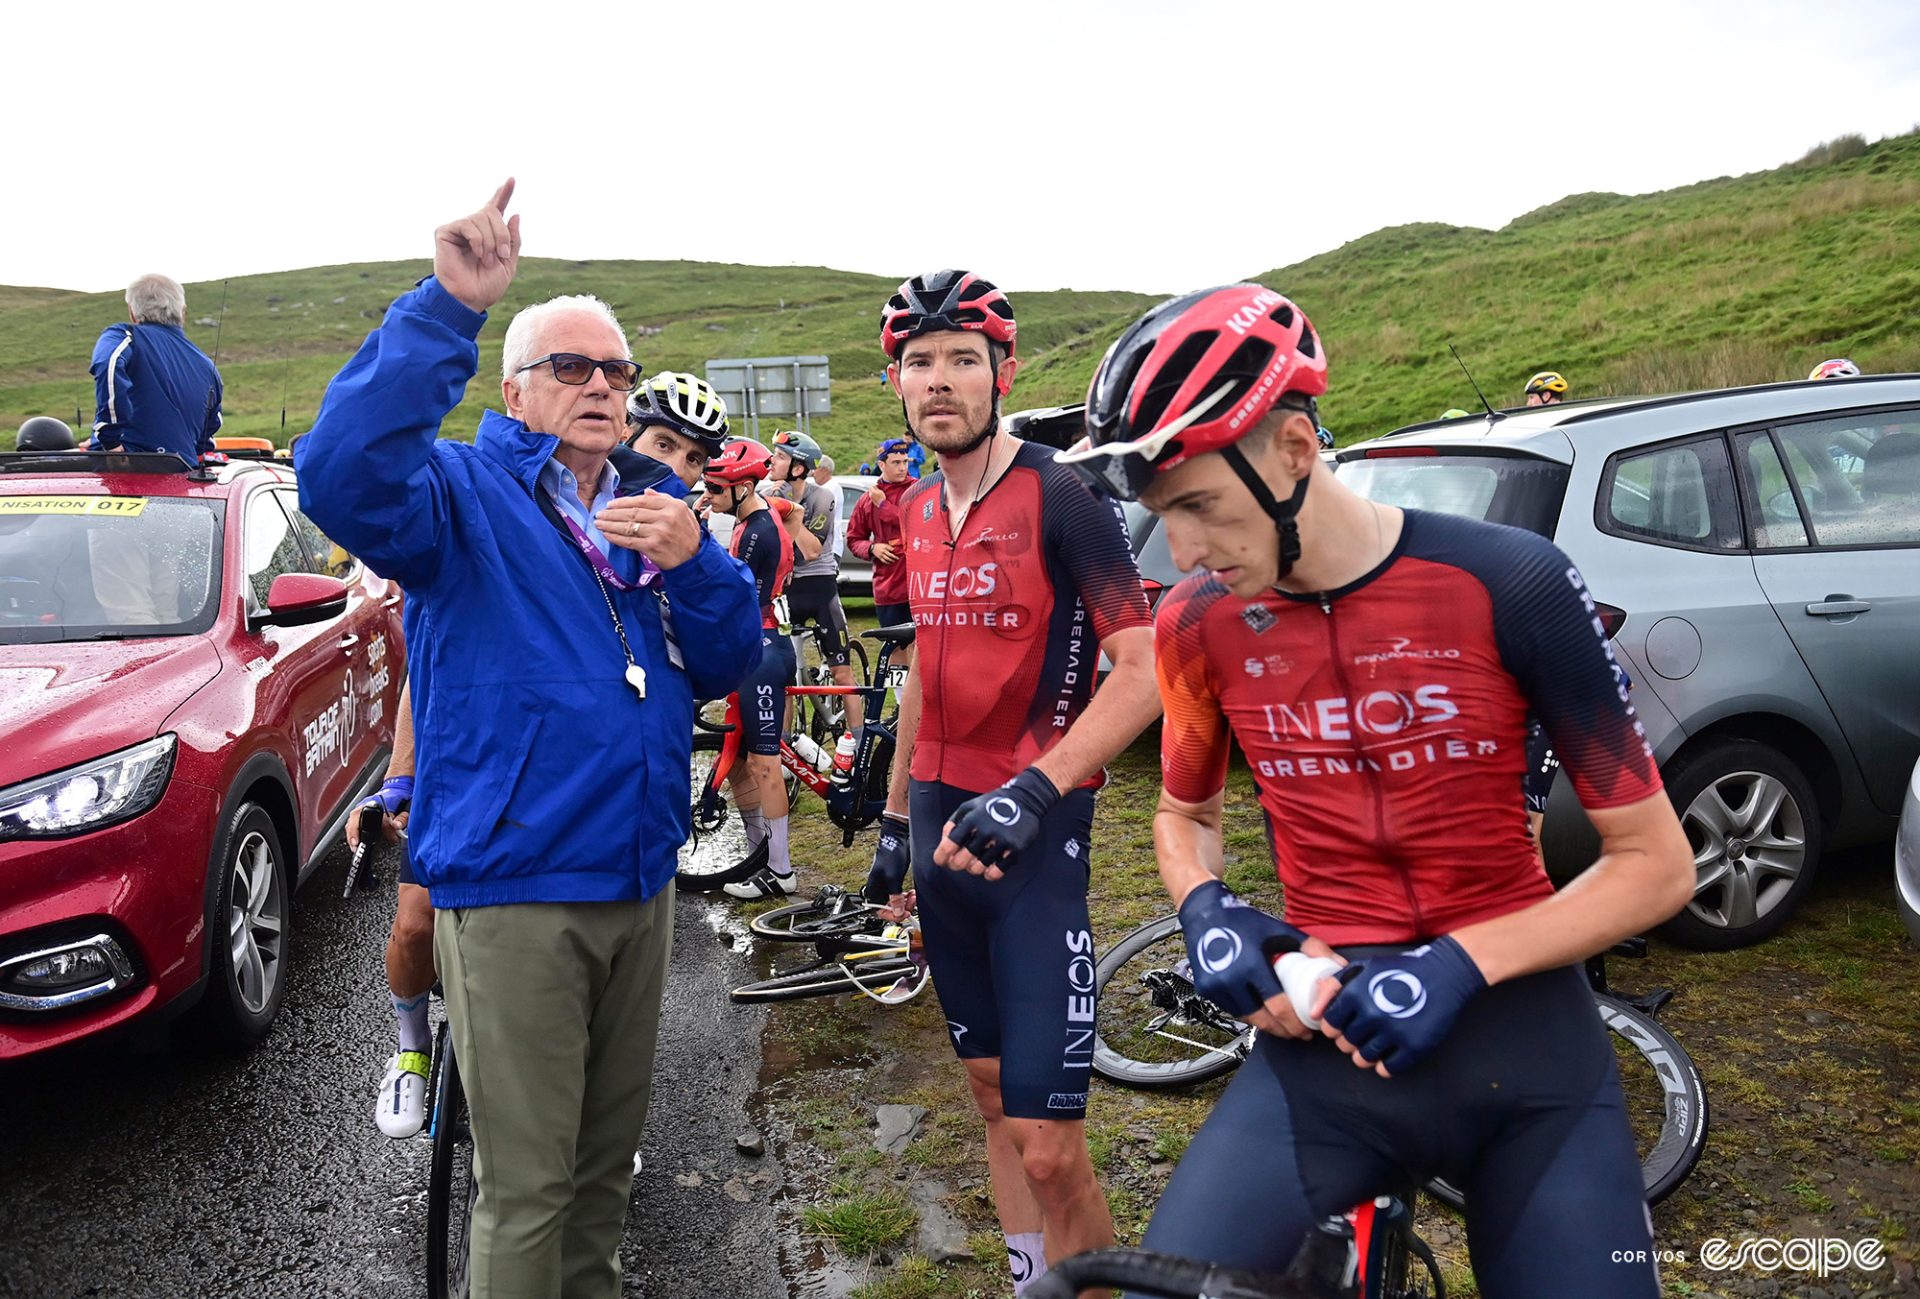 Race promoter Mick Bennett with Luke Rowe and Ben Turner at the 2023 Tour of Britain. They're standing on the side of the road in open countryside, likely after a crash or other event has temporarily neutralized the race.